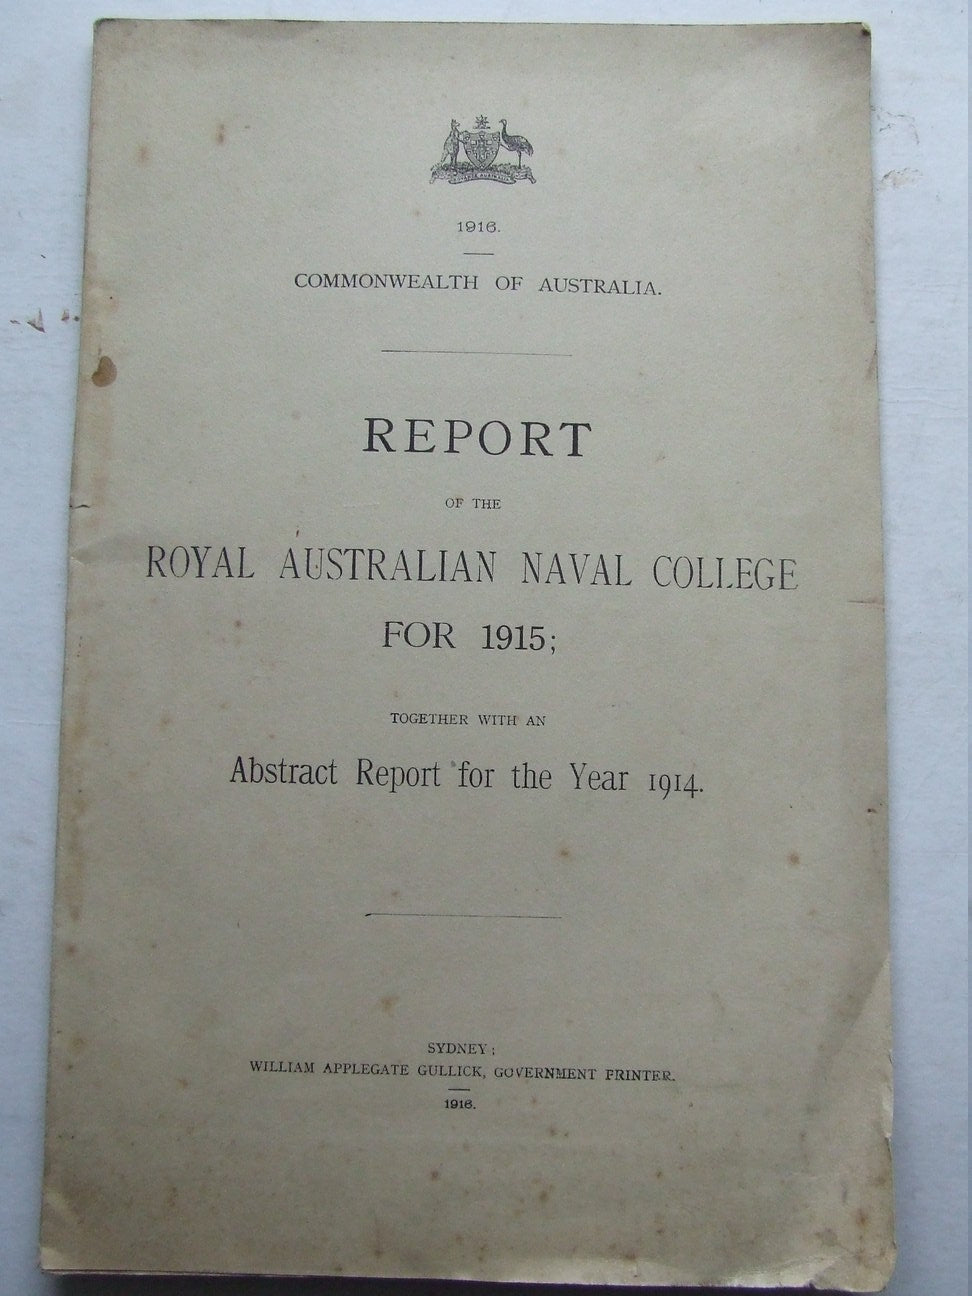 Report of the Royal Australian Naval College for 1915